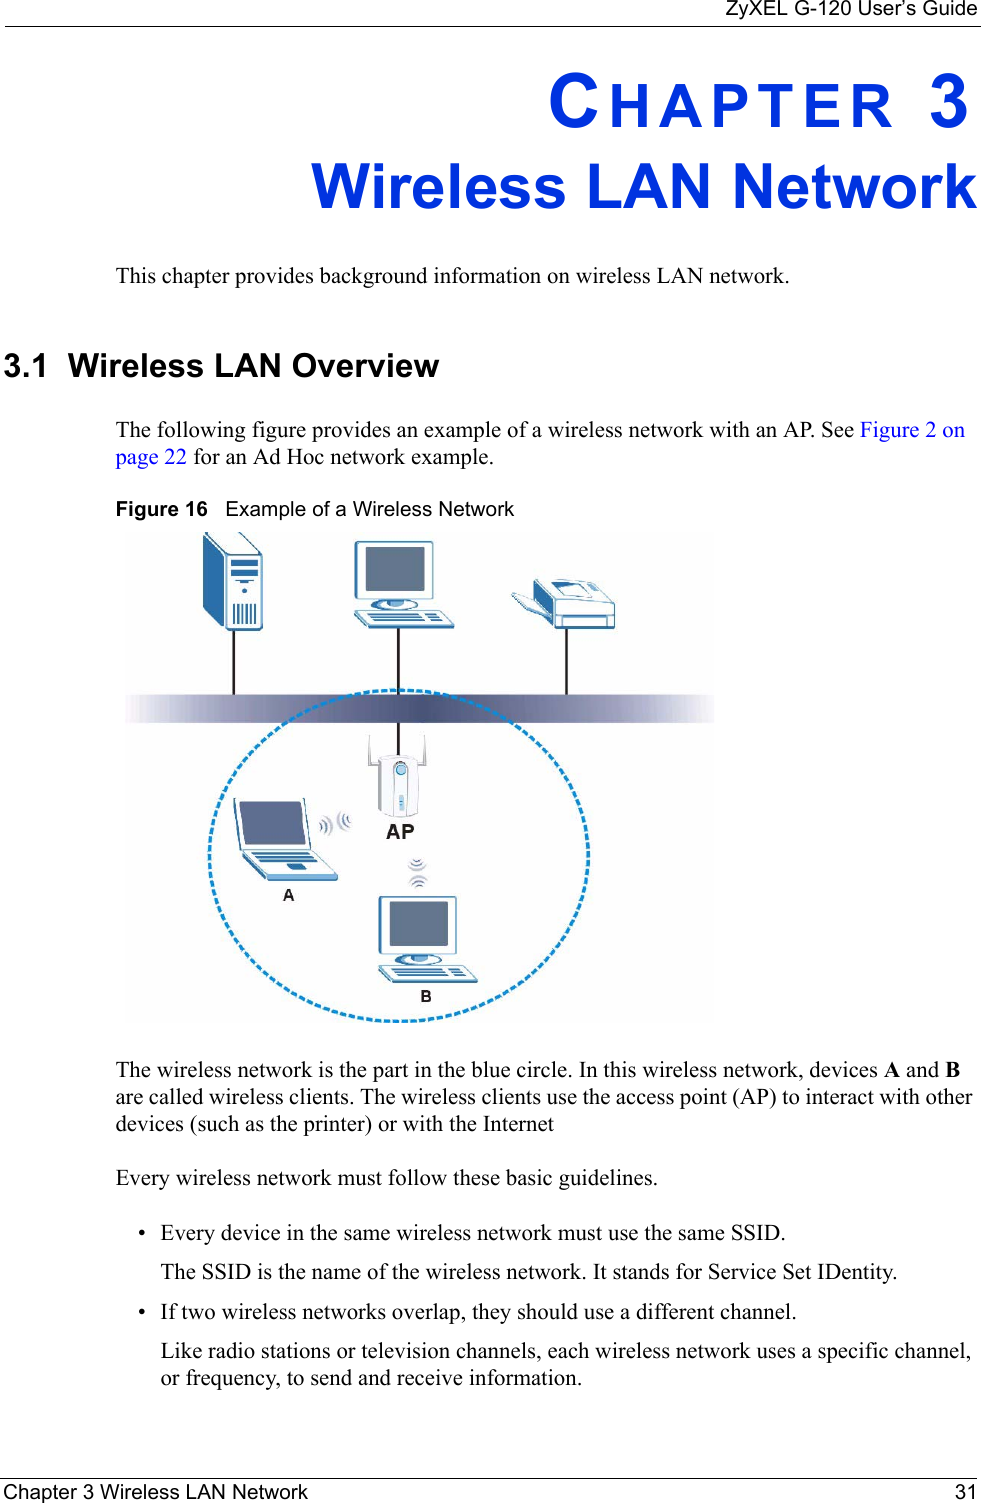 ZyXEL G-120 User’s GuideChapter 3 Wireless LAN Network 31CHAPTER 3Wireless LAN NetworkThis chapter provides background information on wireless LAN network.3.1  Wireless LAN Overview The following figure provides an example of a wireless network with an AP. See Figure 2 on page 22 for an Ad Hoc network example.Figure 16   Example of a Wireless NetworkThe wireless network is the part in the blue circle. In this wireless network, devices A and B are called wireless clients. The wireless clients use the access point (AP) to interact with other devices (such as the printer) or with the InternetEvery wireless network must follow these basic guidelines.• Every device in the same wireless network must use the same SSID.The SSID is the name of the wireless network. It stands for Service Set IDentity.• If two wireless networks overlap, they should use a different channel.Like radio stations or television channels, each wireless network uses a specific channel, or frequency, to send and receive information.